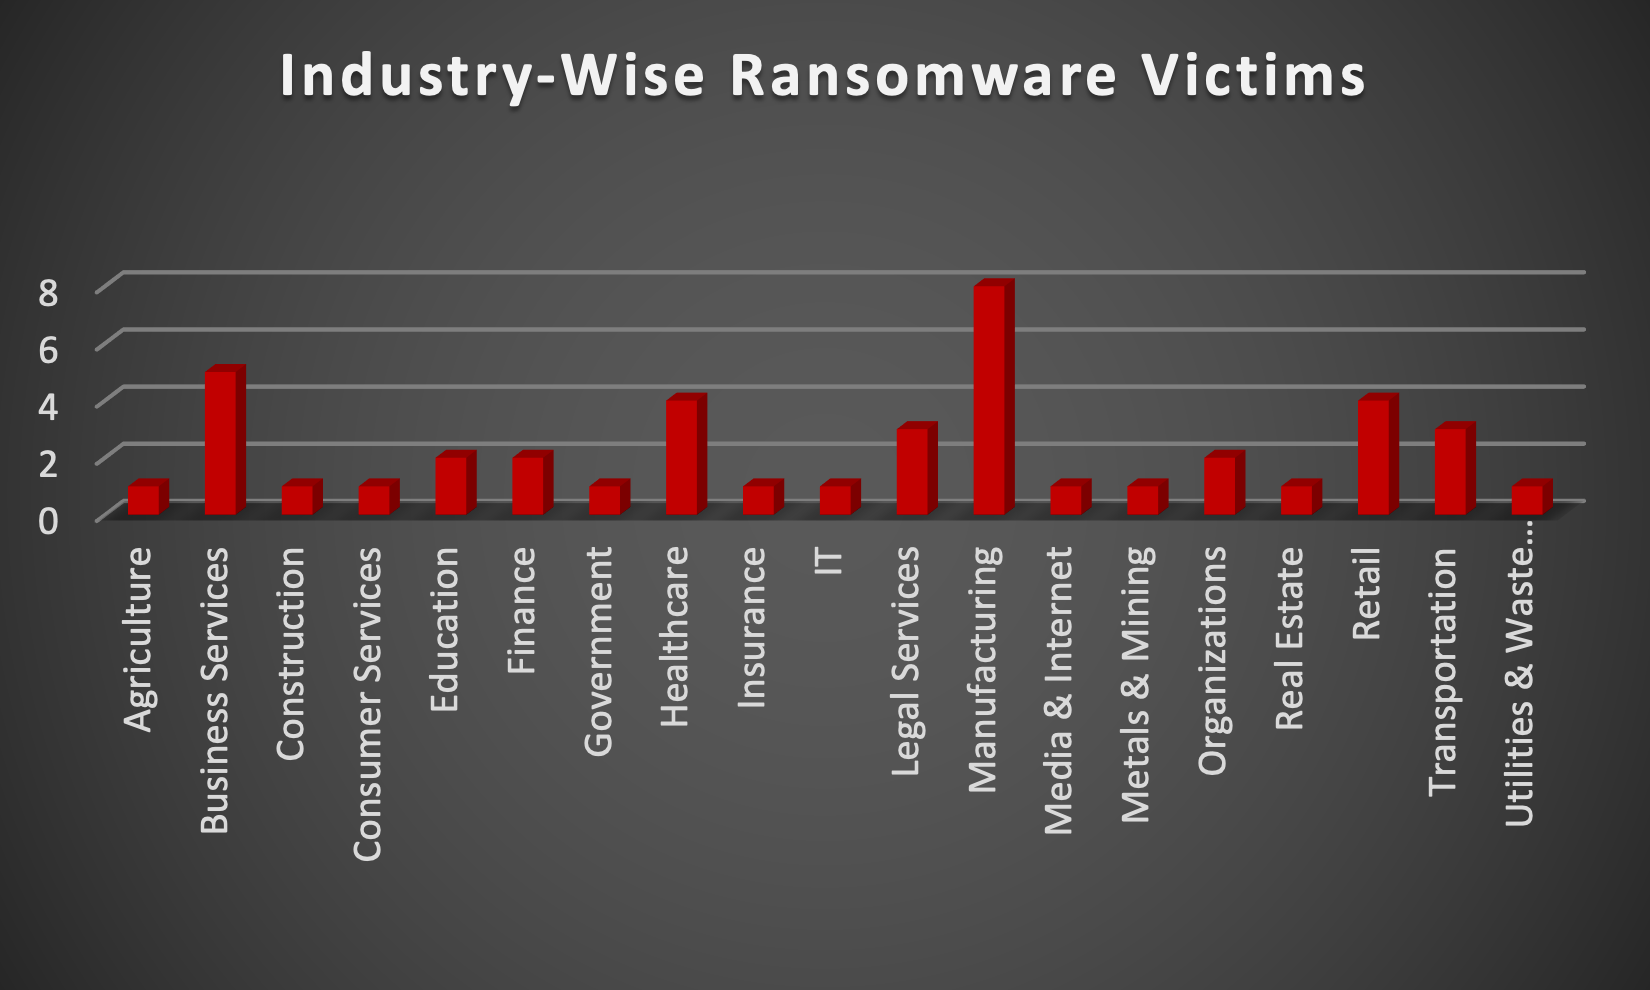 Industry-wise Ransomware Victims